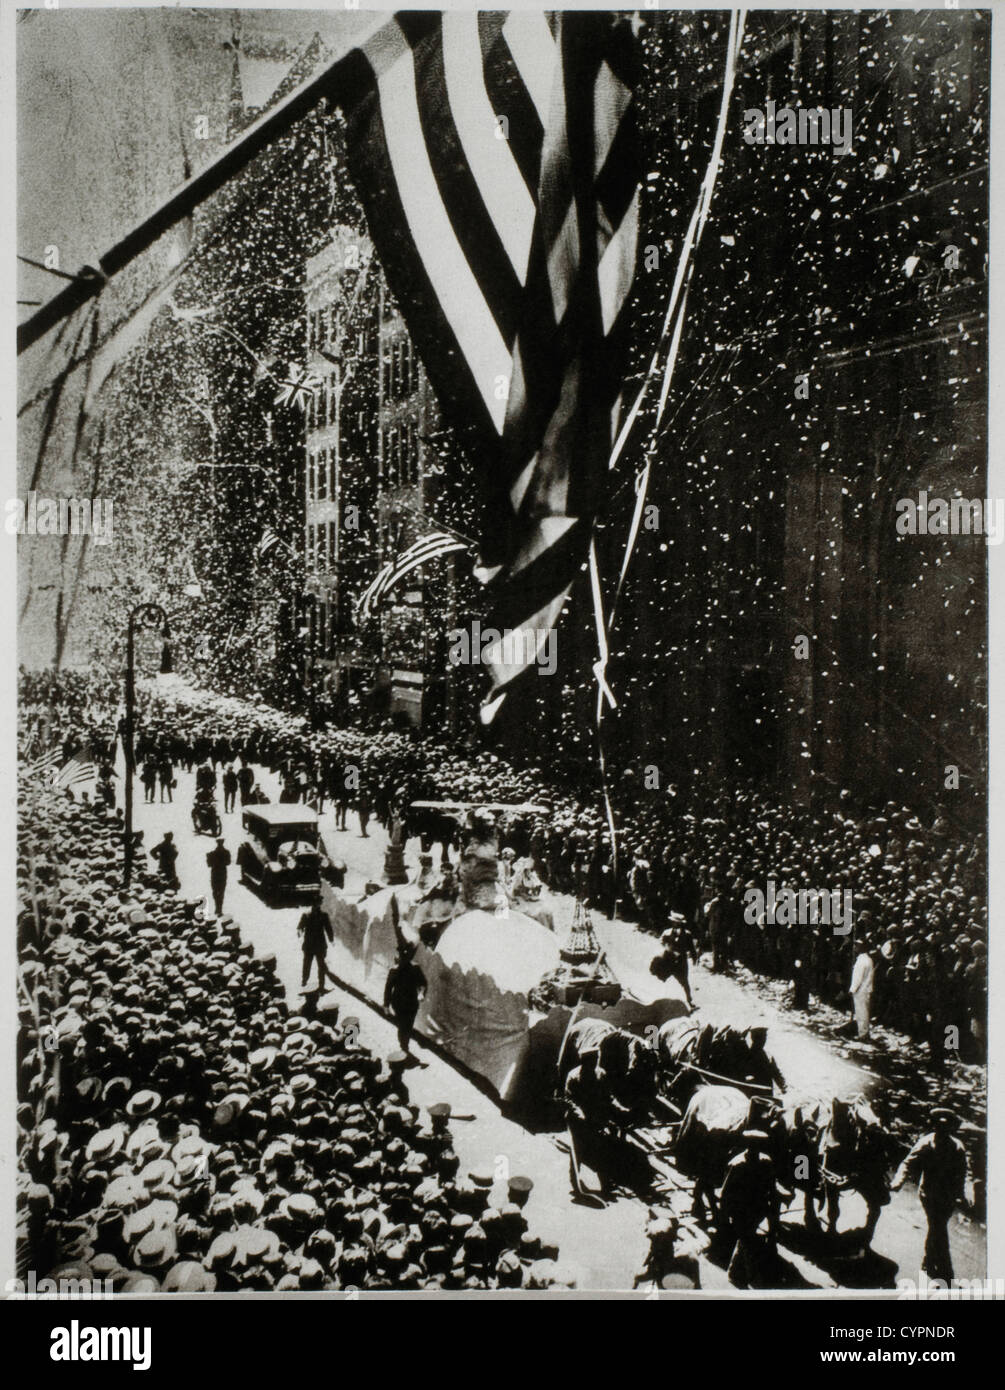 A ticker-tape parade for Charles Lindbergh in New York after his